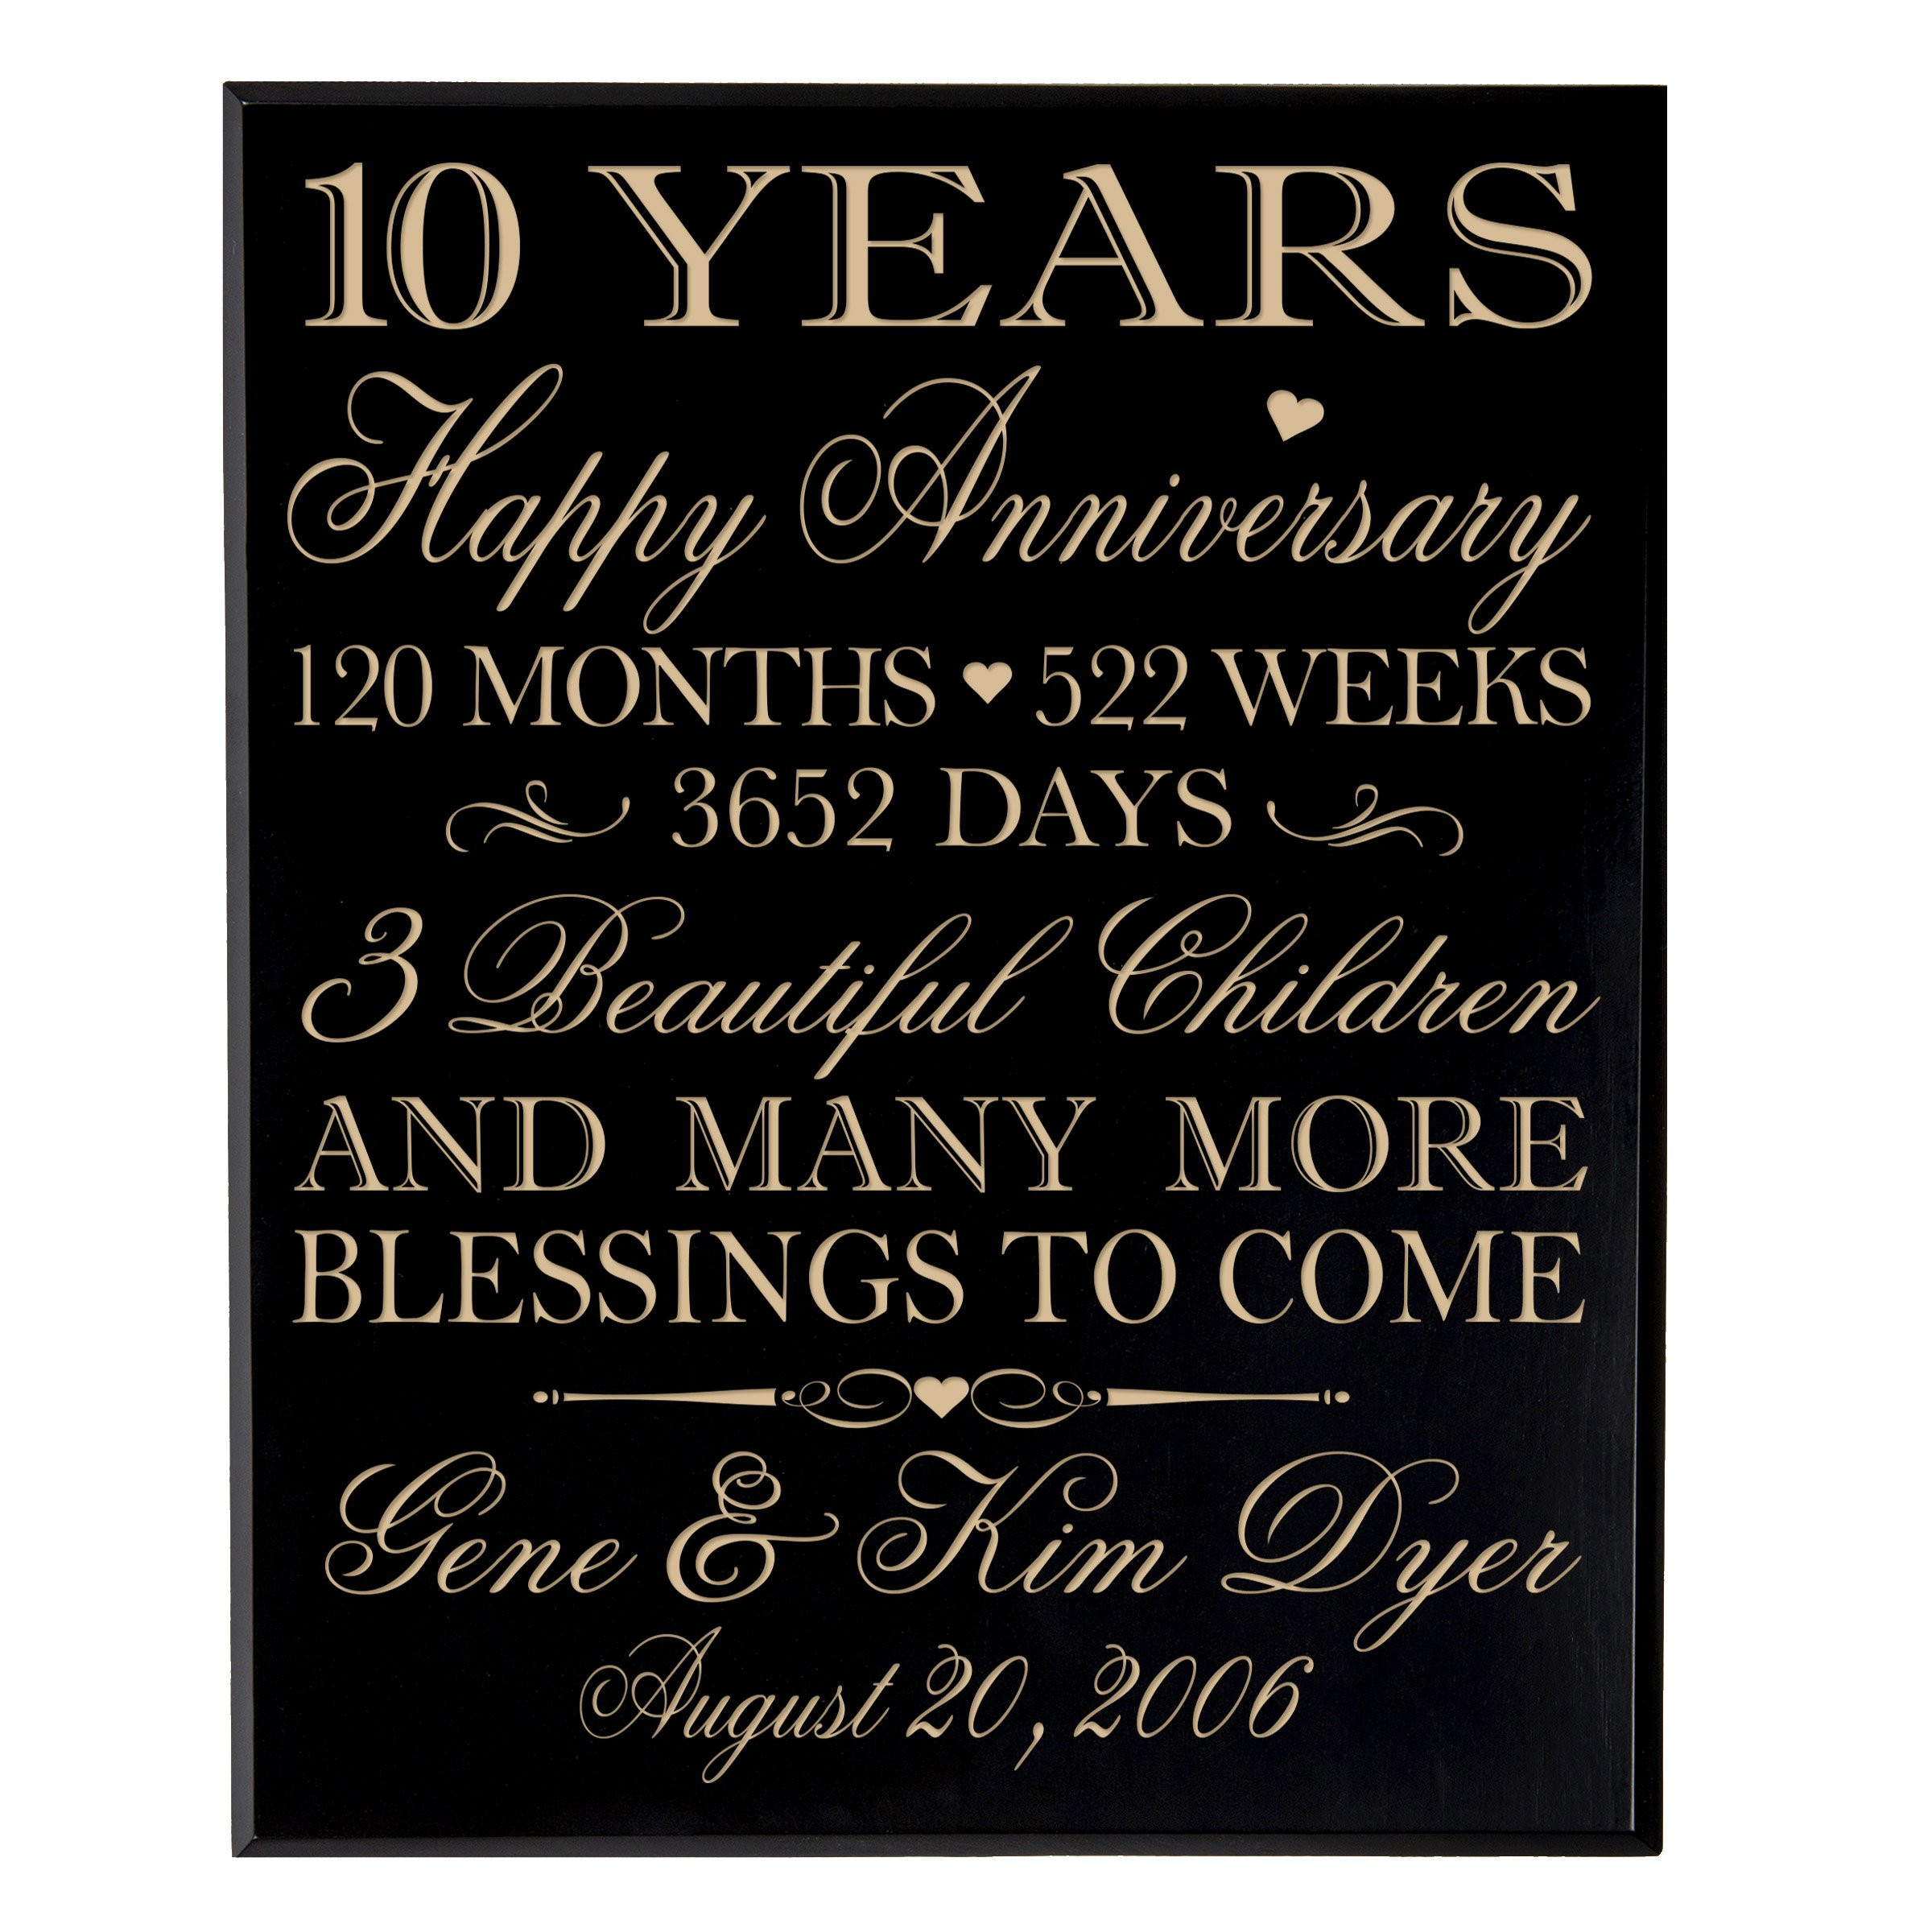 10 Year Wedding Anniversary Gift Ideas For Couple
 Buy Personalized 10 year Anniversary wedding Gifts Ideas